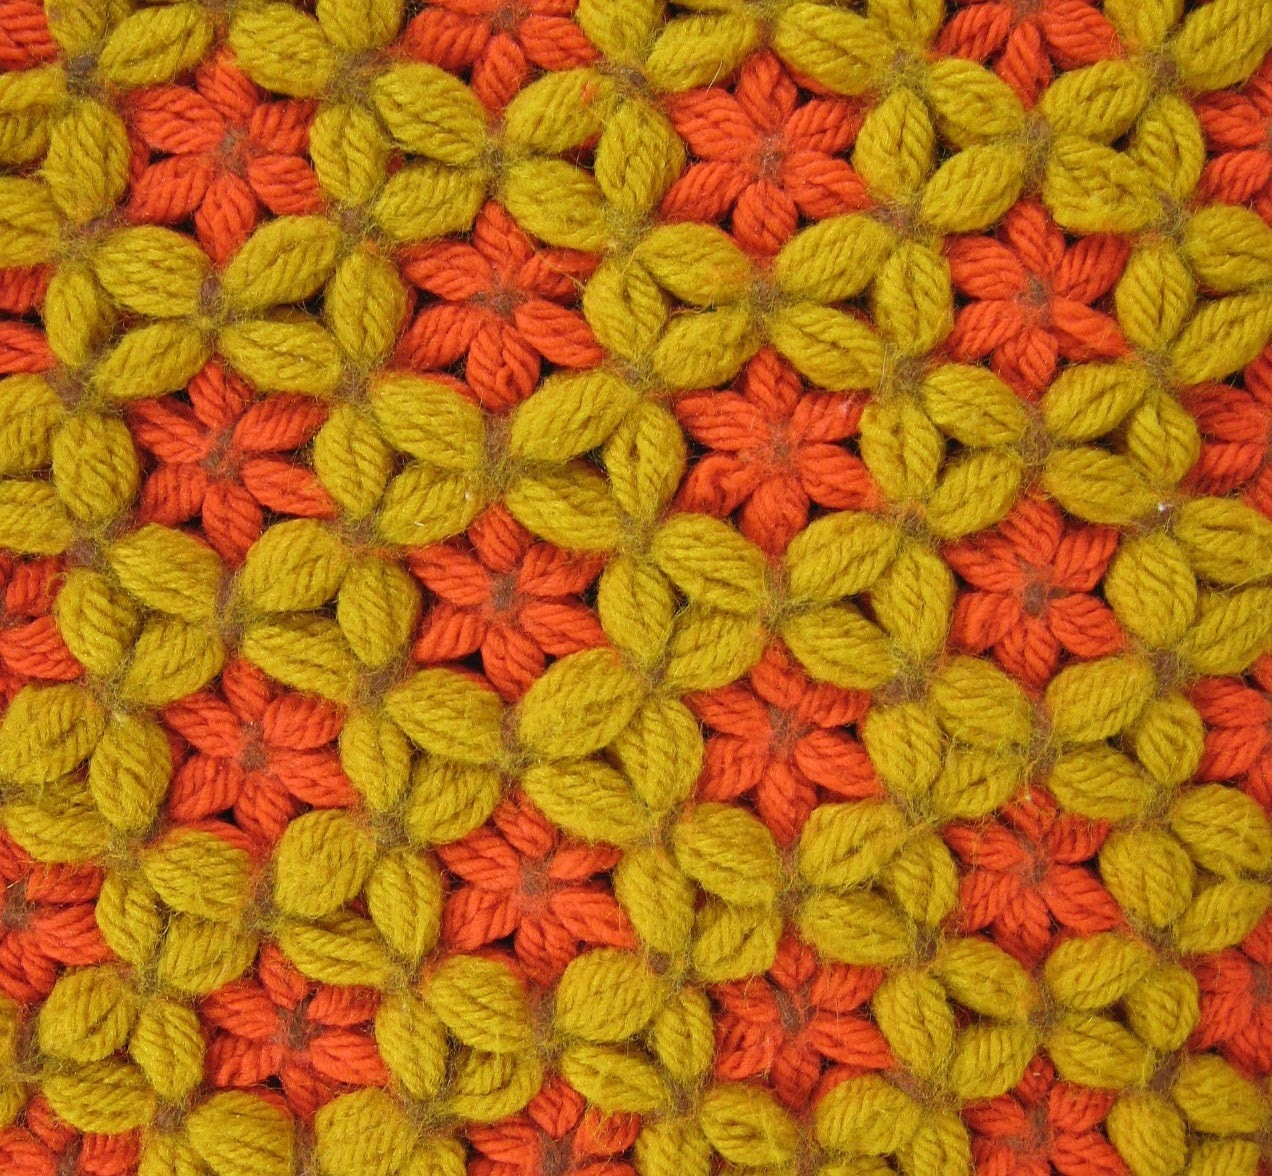 4 VINTAGE Orange and Yellow Crochet Placemats